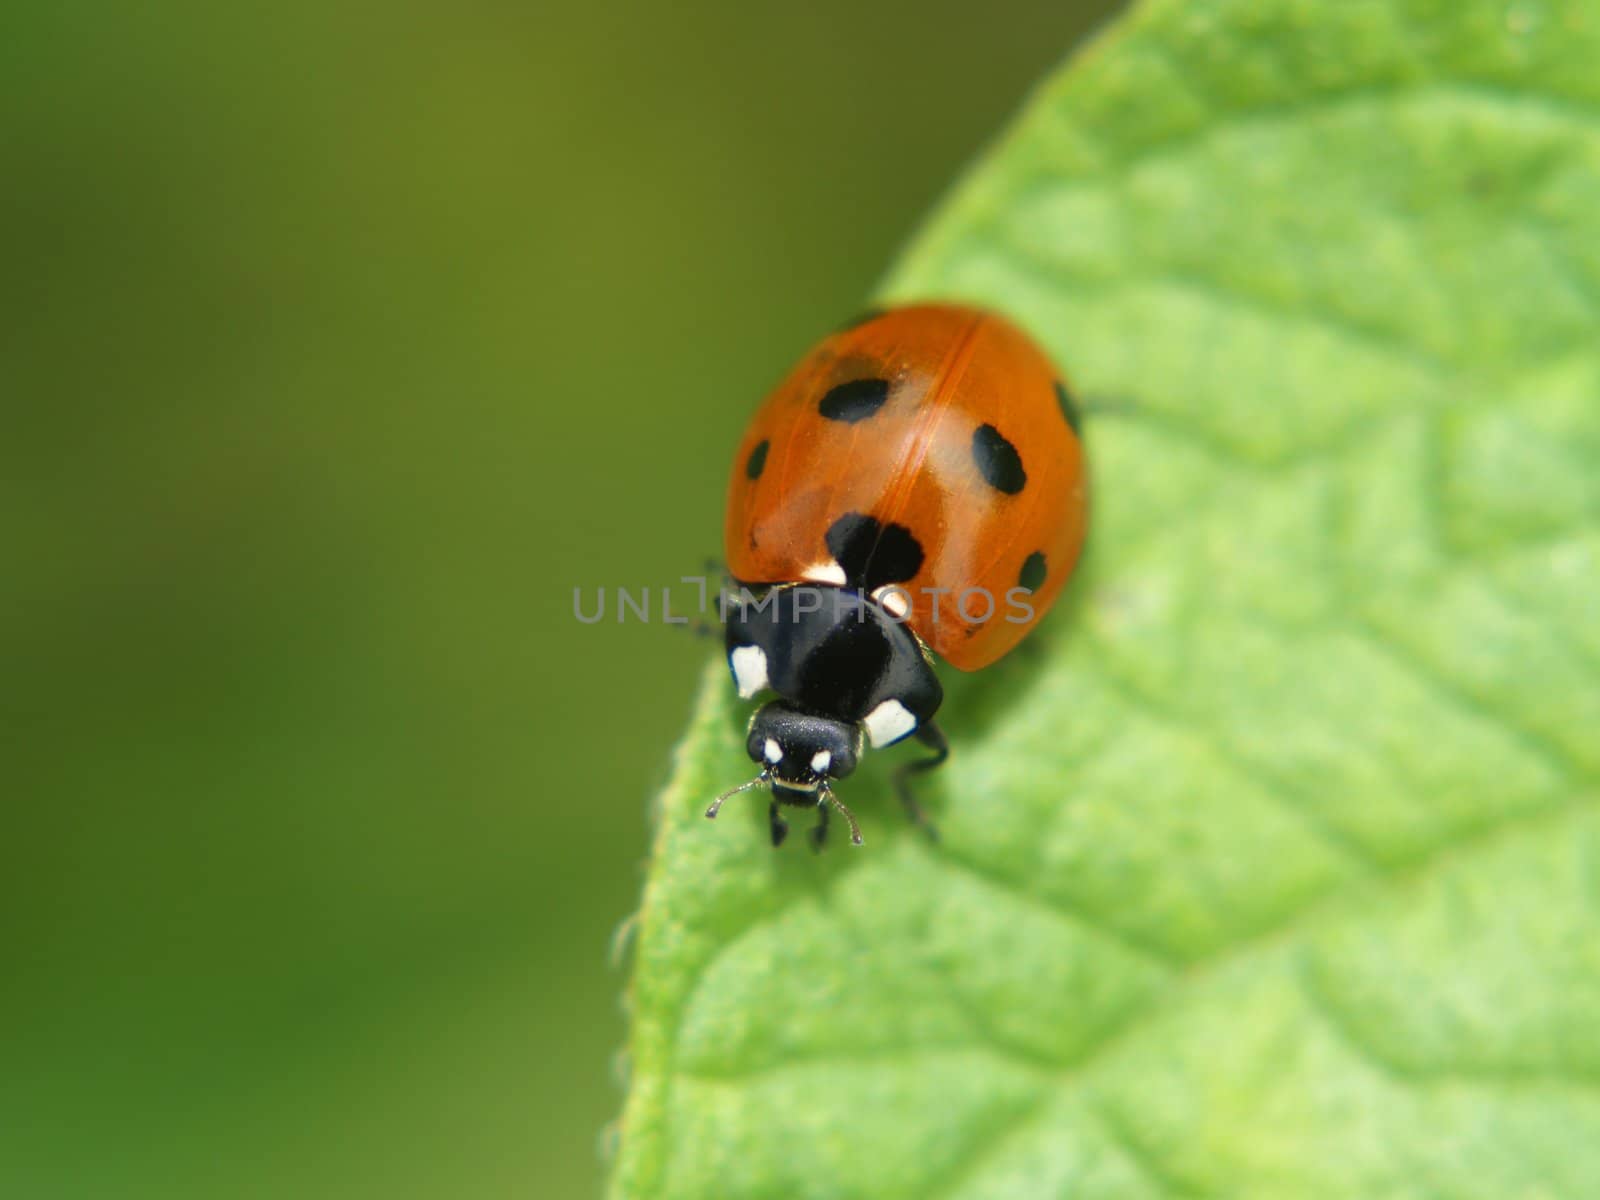 Spotted ladybird on a green leaf by anderm